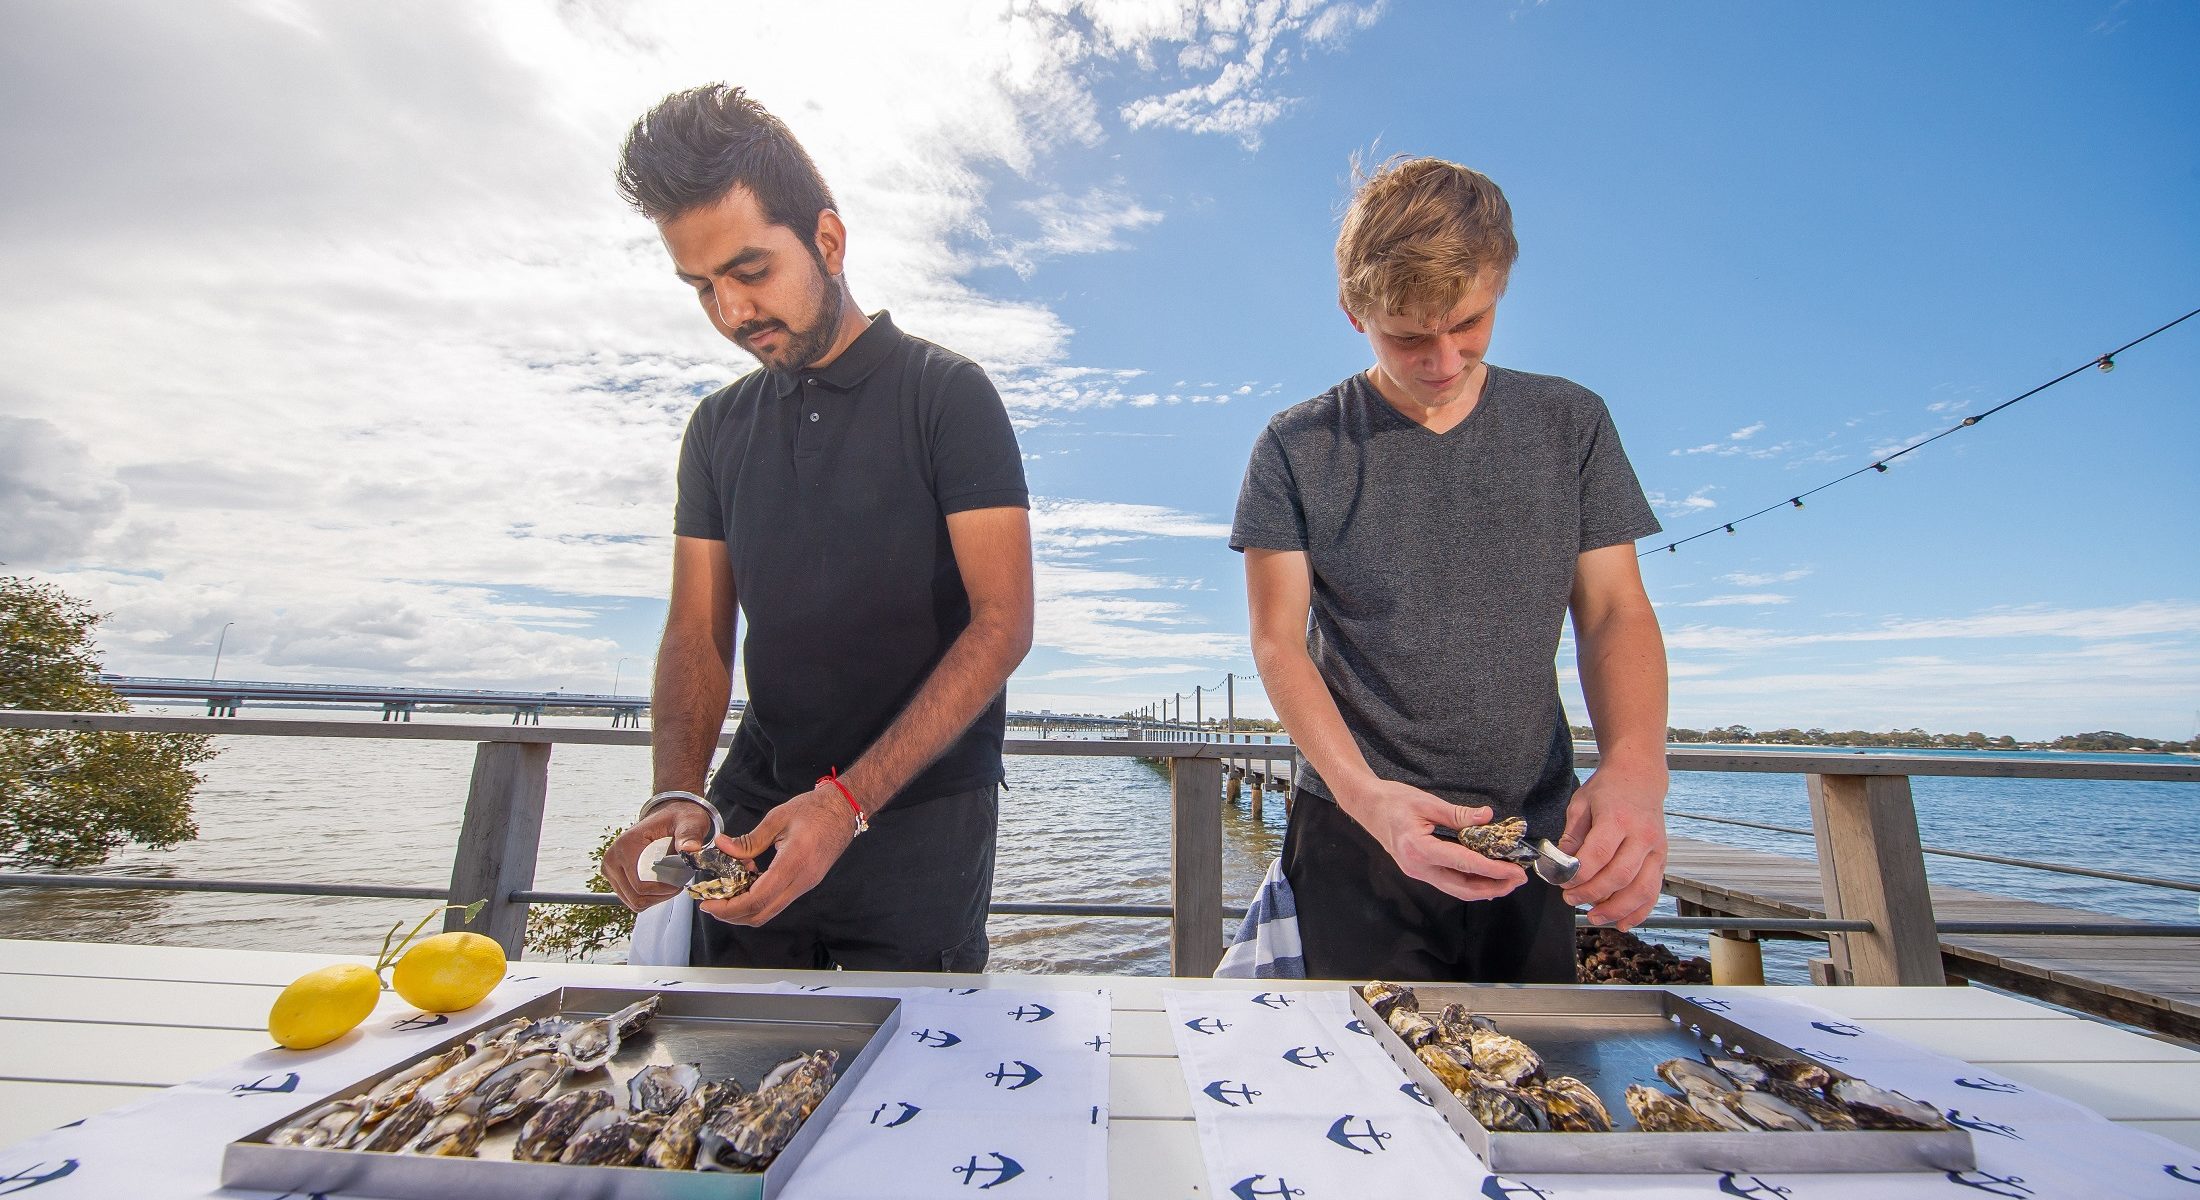 Have a shucking good time at the Oyster Festival at Sandstone Point Hotel